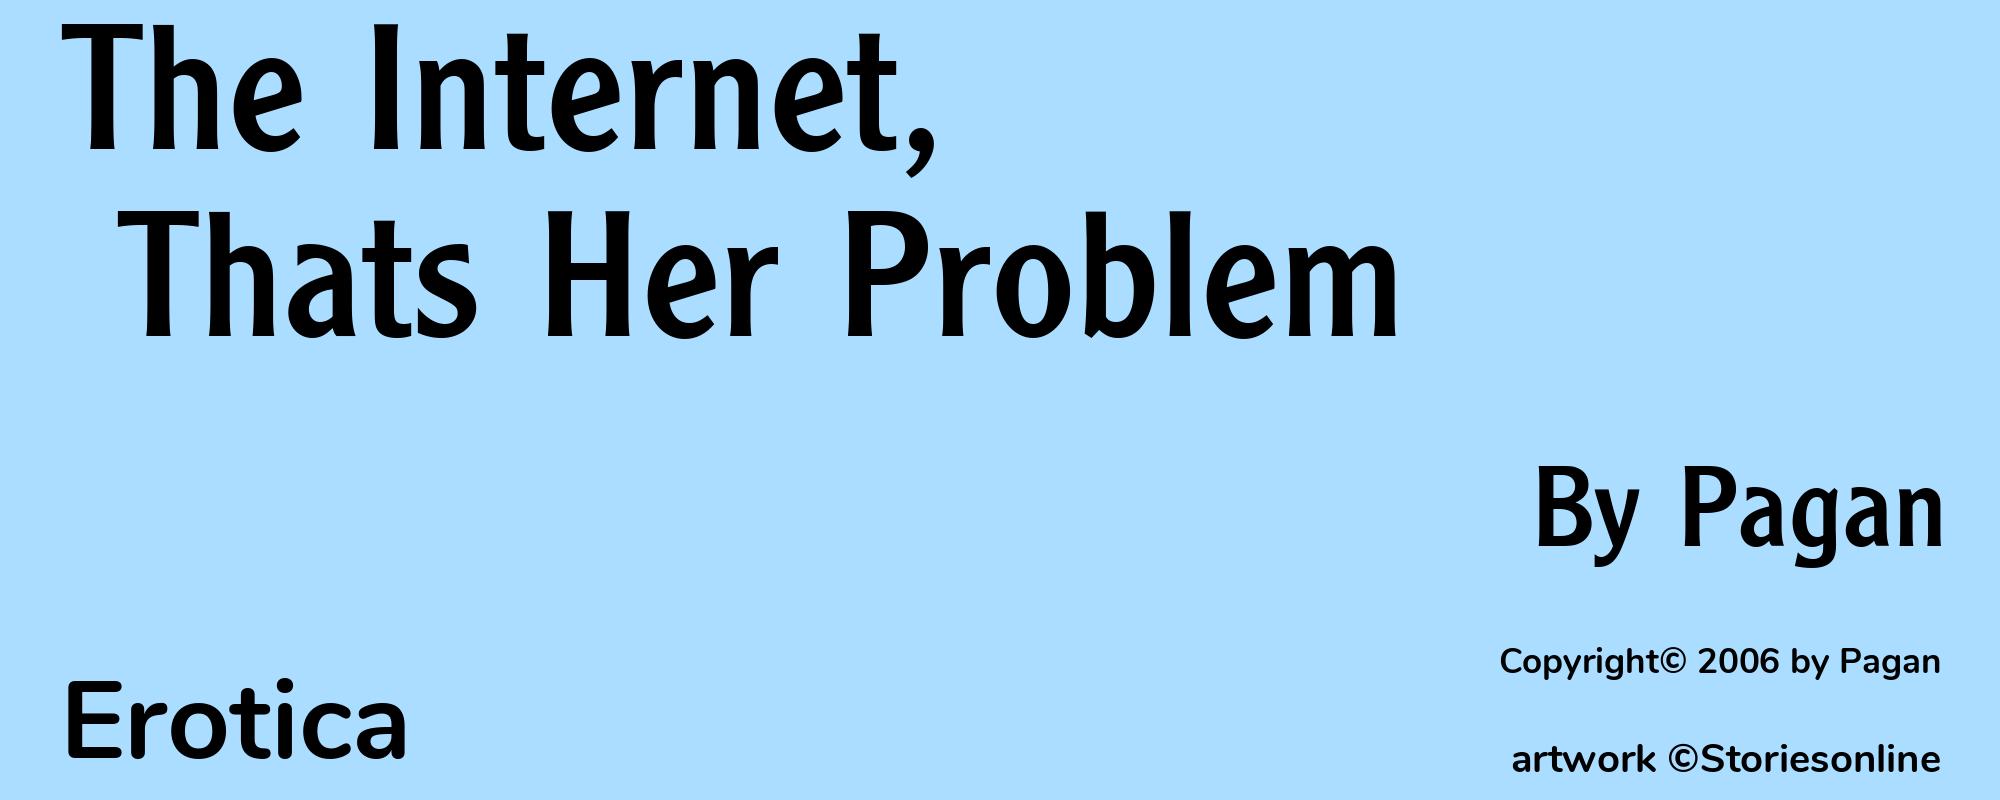 The Internet, Thats Her Problem - Cover